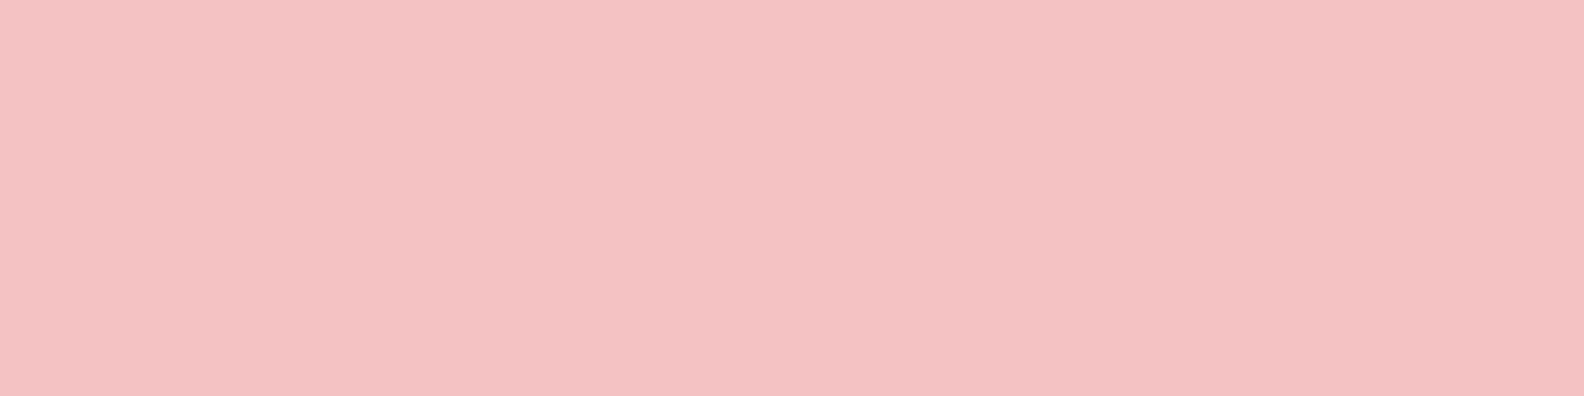 1584x396 Baby Pink Solid Color Background